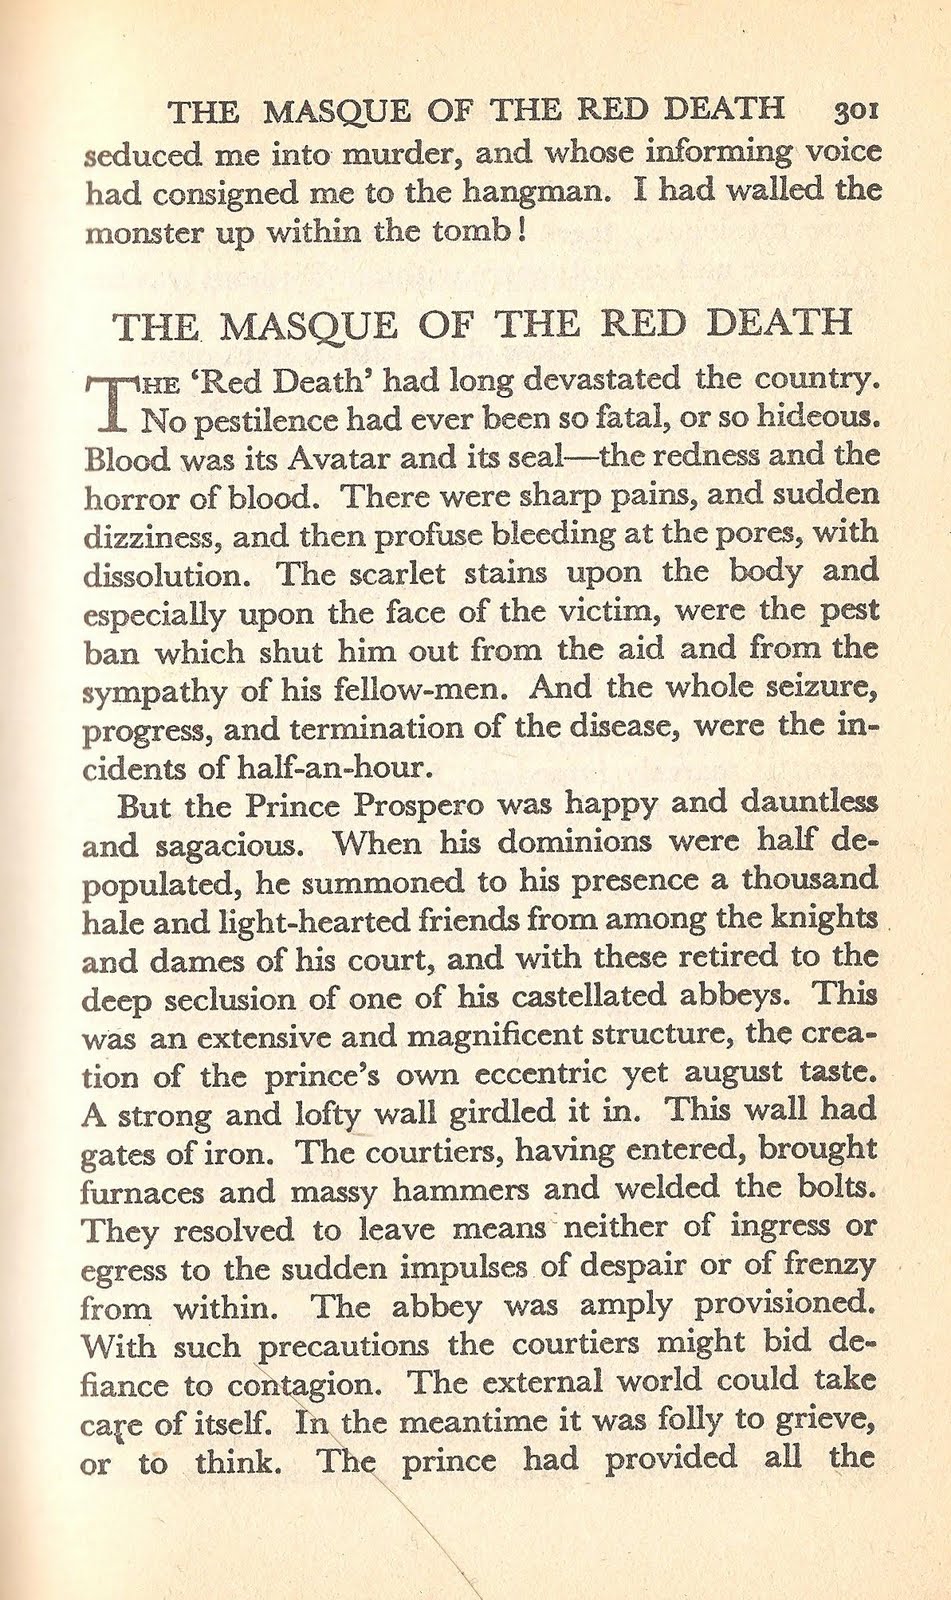 summary of the masque of the red death by edgar allan poe